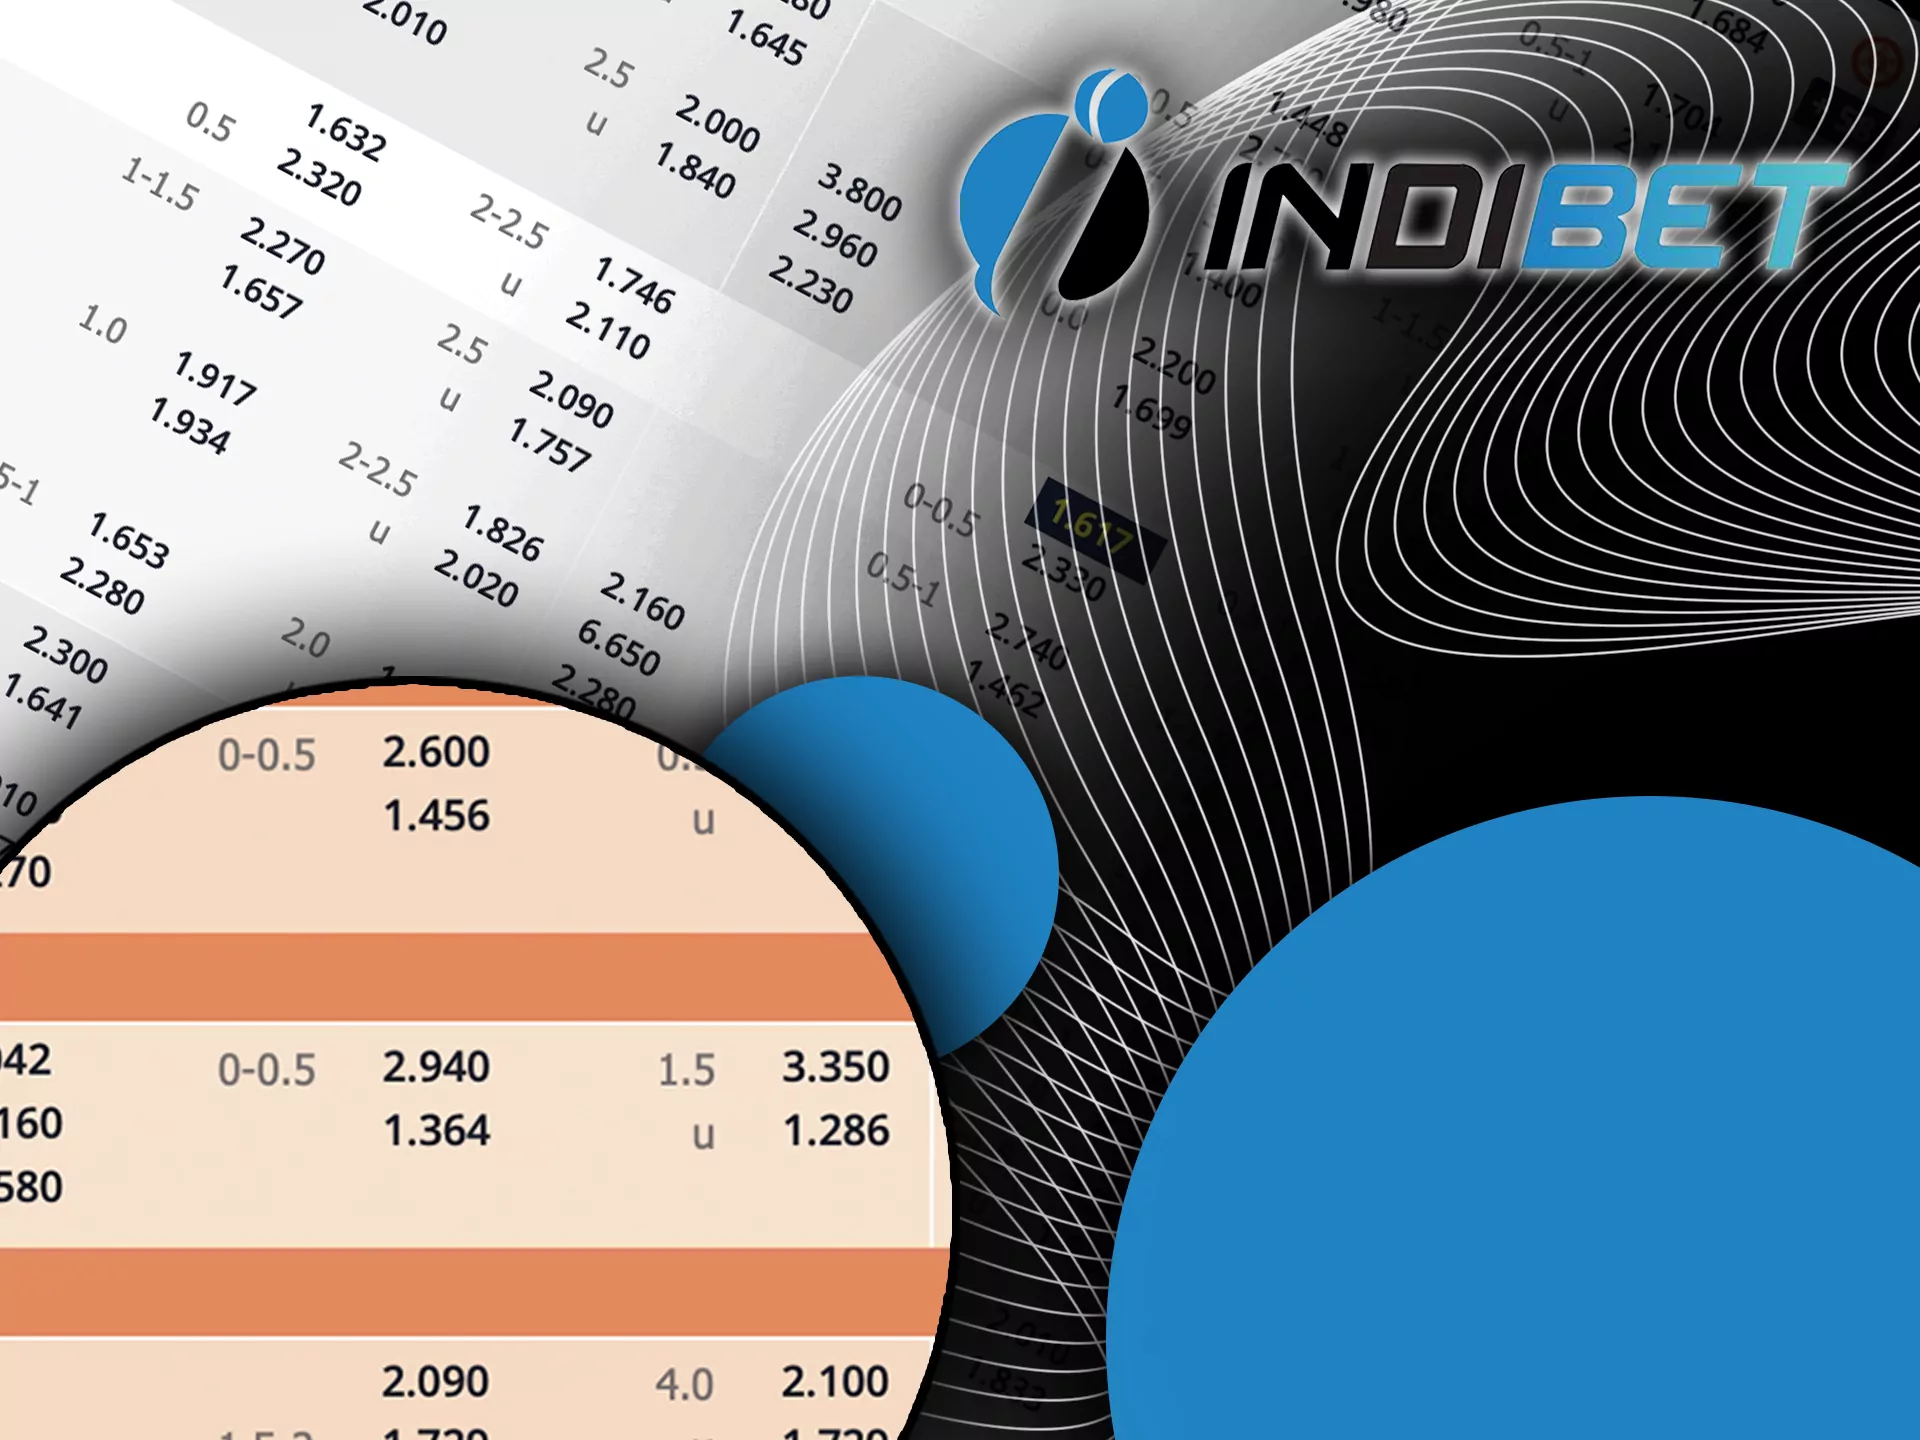 Indibet has attractive odds on most of the events.